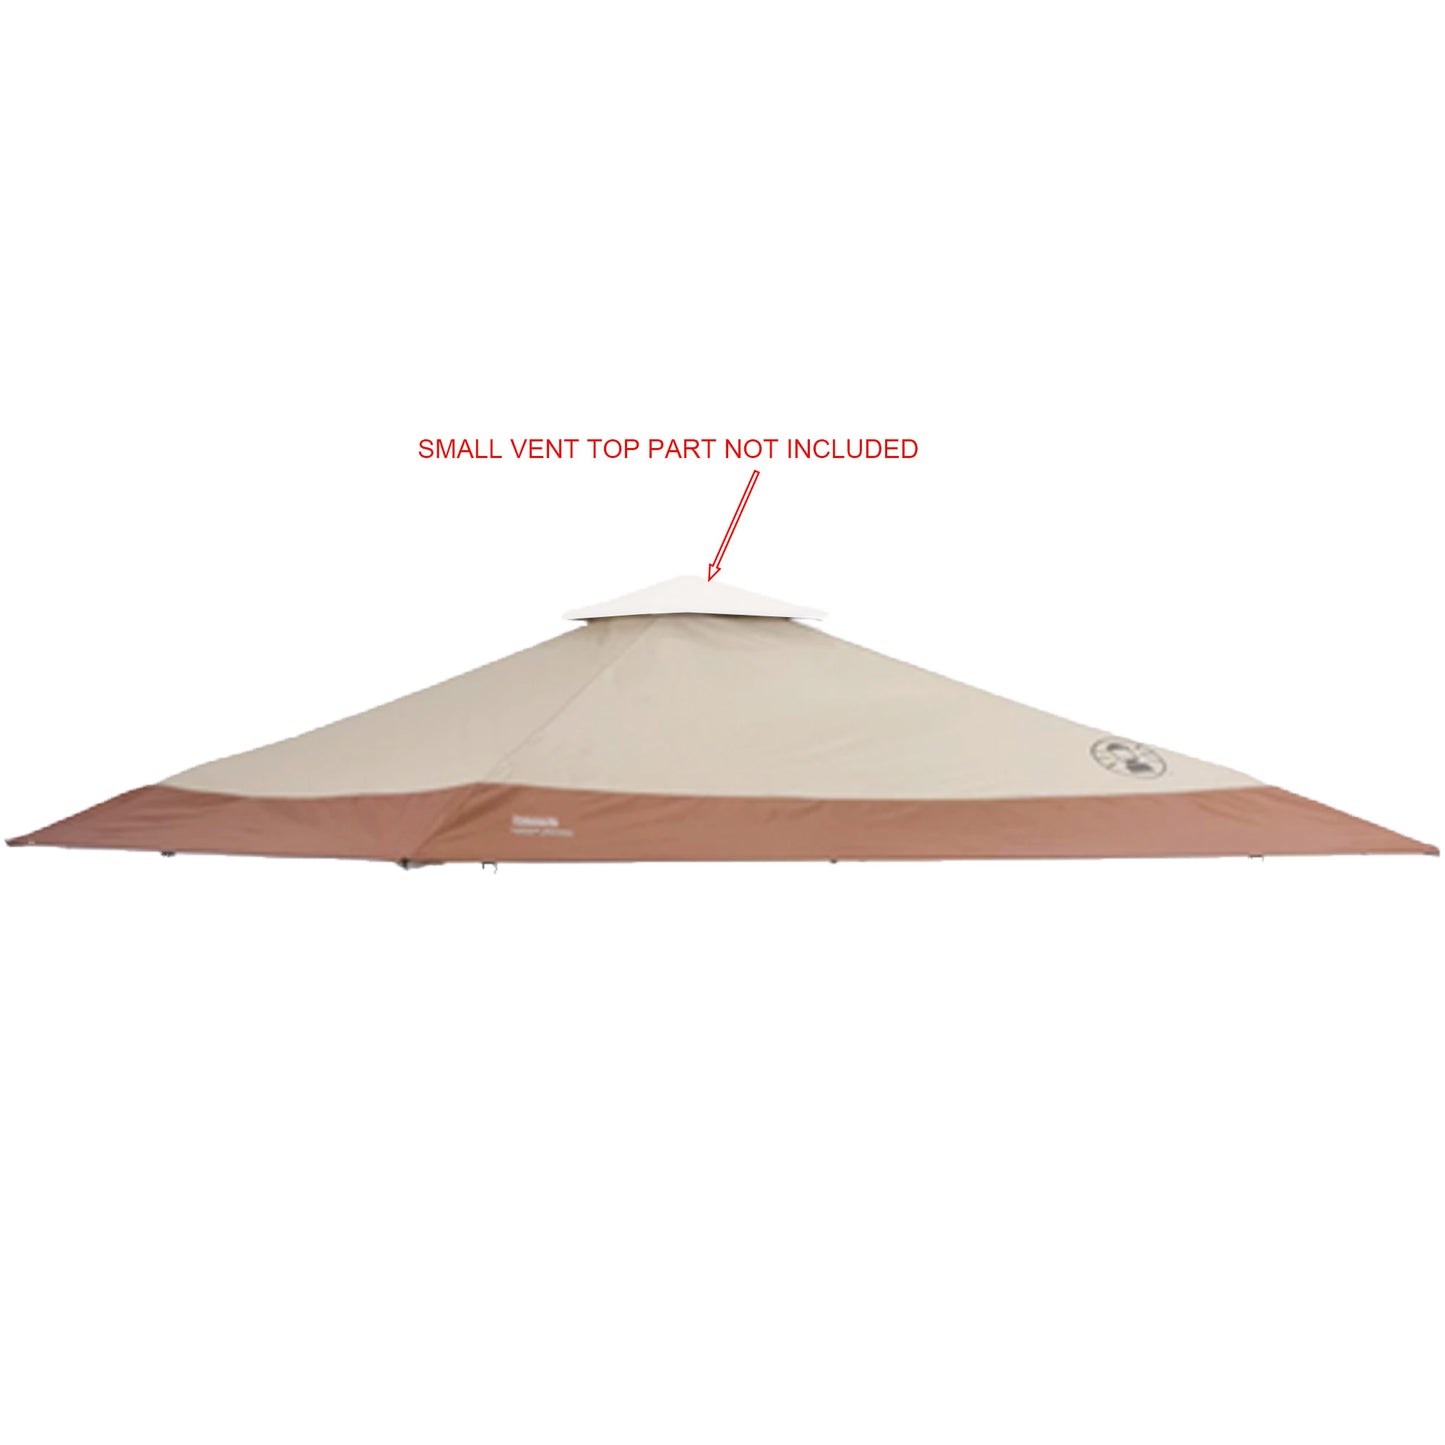 Canopy Top for Coleman 13' x 13' Instant Beach Canopy Eaved Shelter Replacement Parts(SMALL VENT TOP PART NOT INCLUDED)